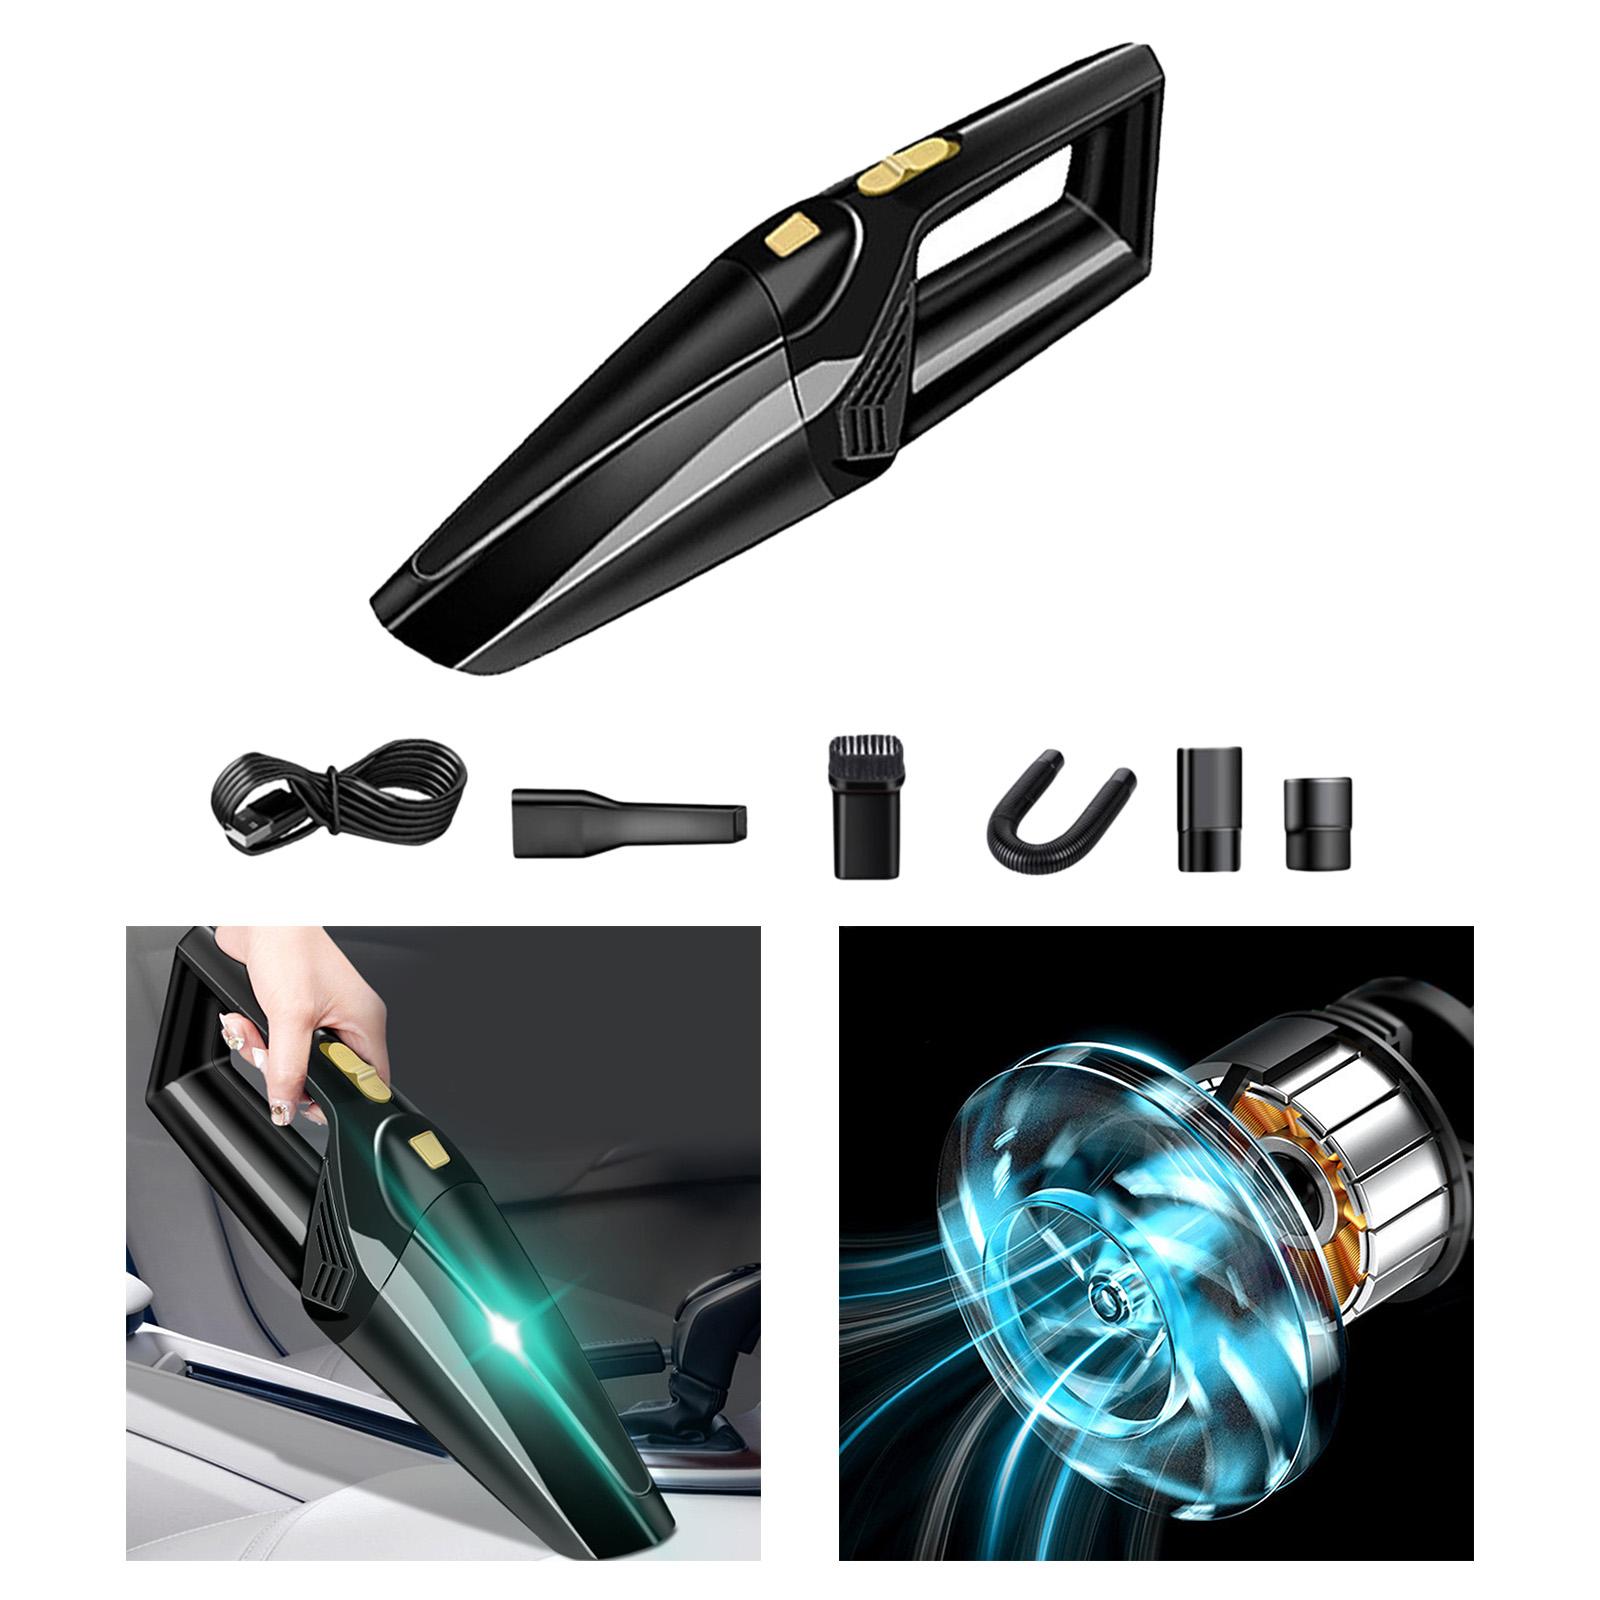 Car Vacuum Cleaner Wireless USB Rechargeable Fit for Office Pet Hair Black